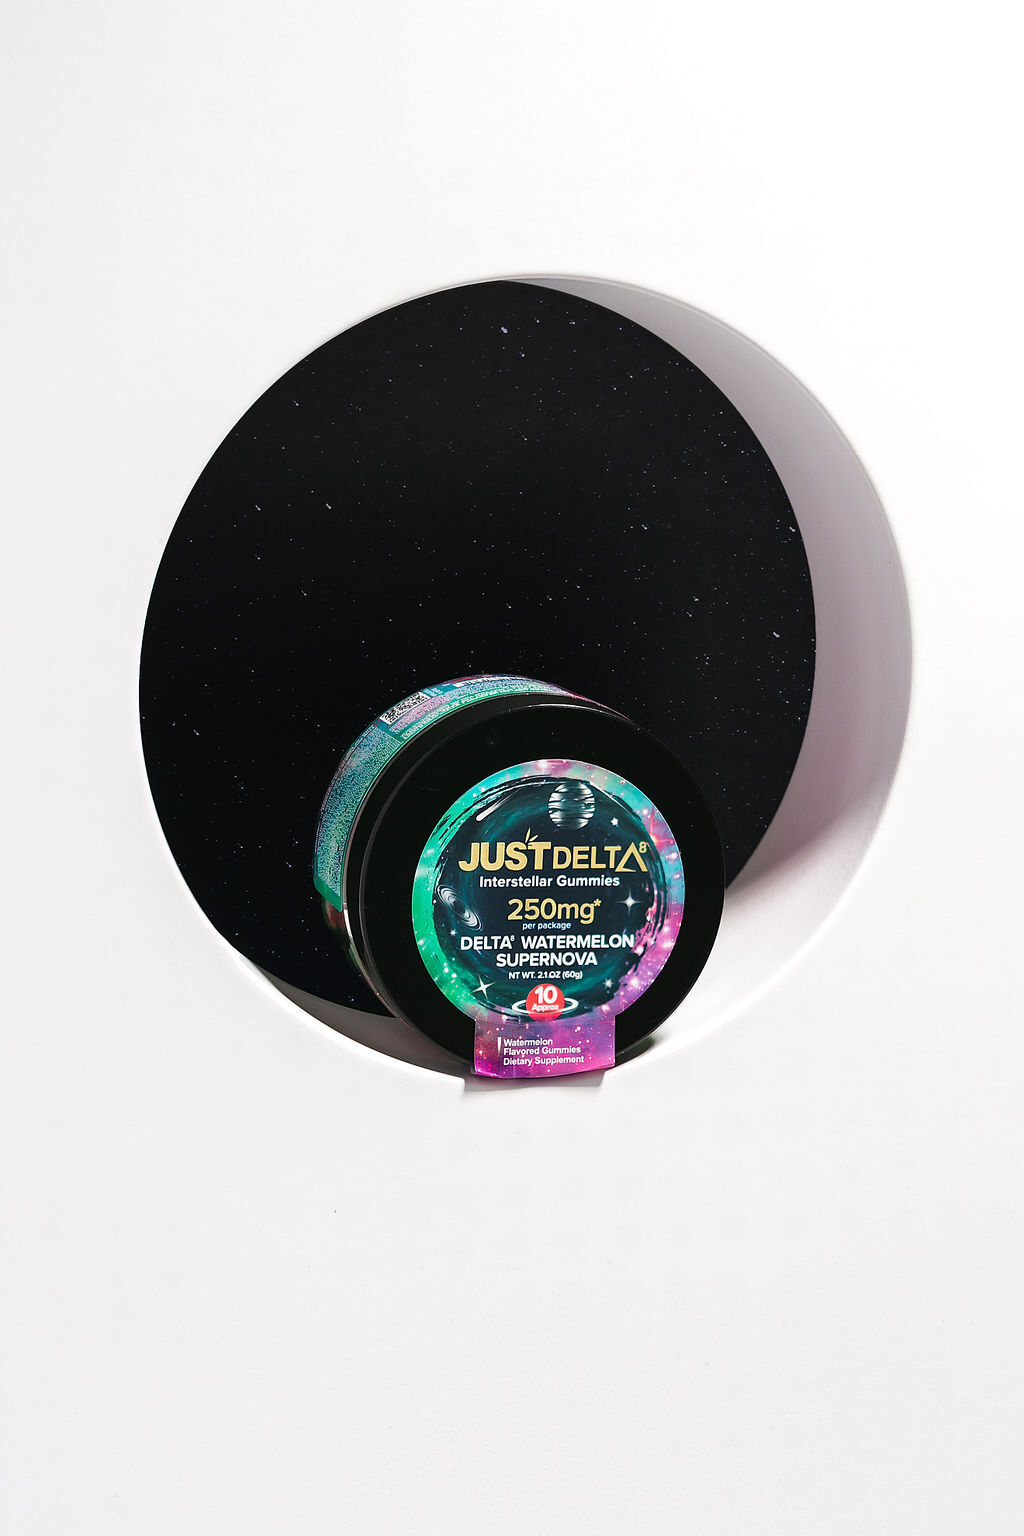 FULL REVIEW OF JUSTDELTA 8 DISPOSABLES